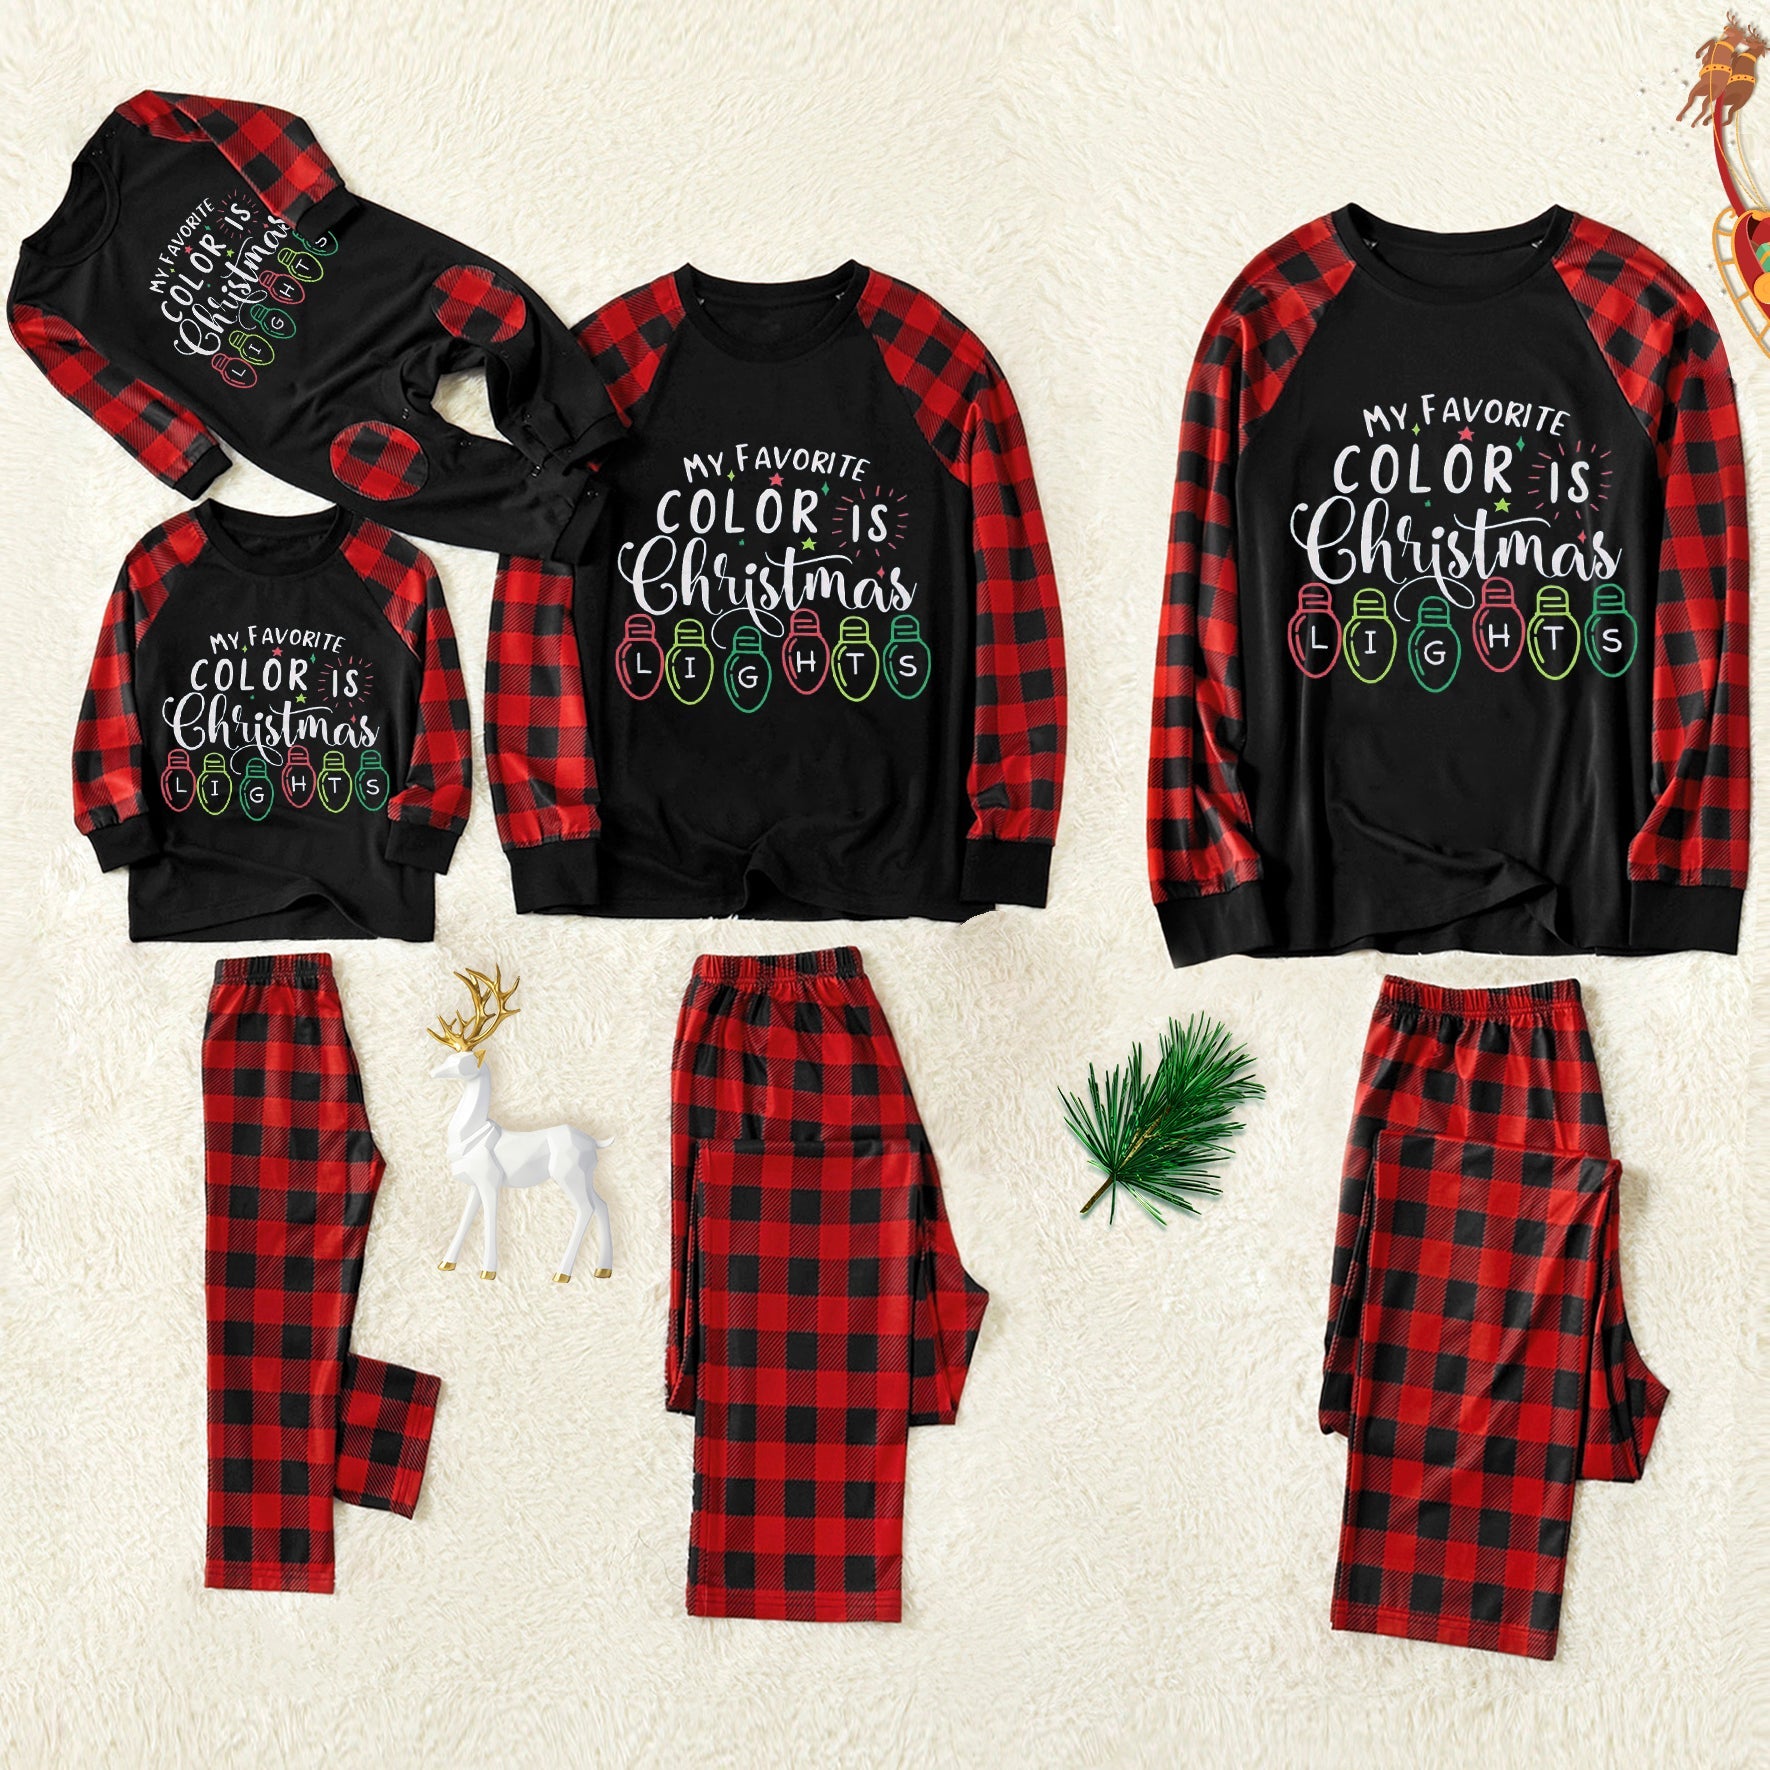 'My Favorite Color is Christmas Lights' Letter Print Light Bulb Patterned  Contrast Black top and Black & Red Plaid Pants Family Matching Pajamas Set With Dog Bandana